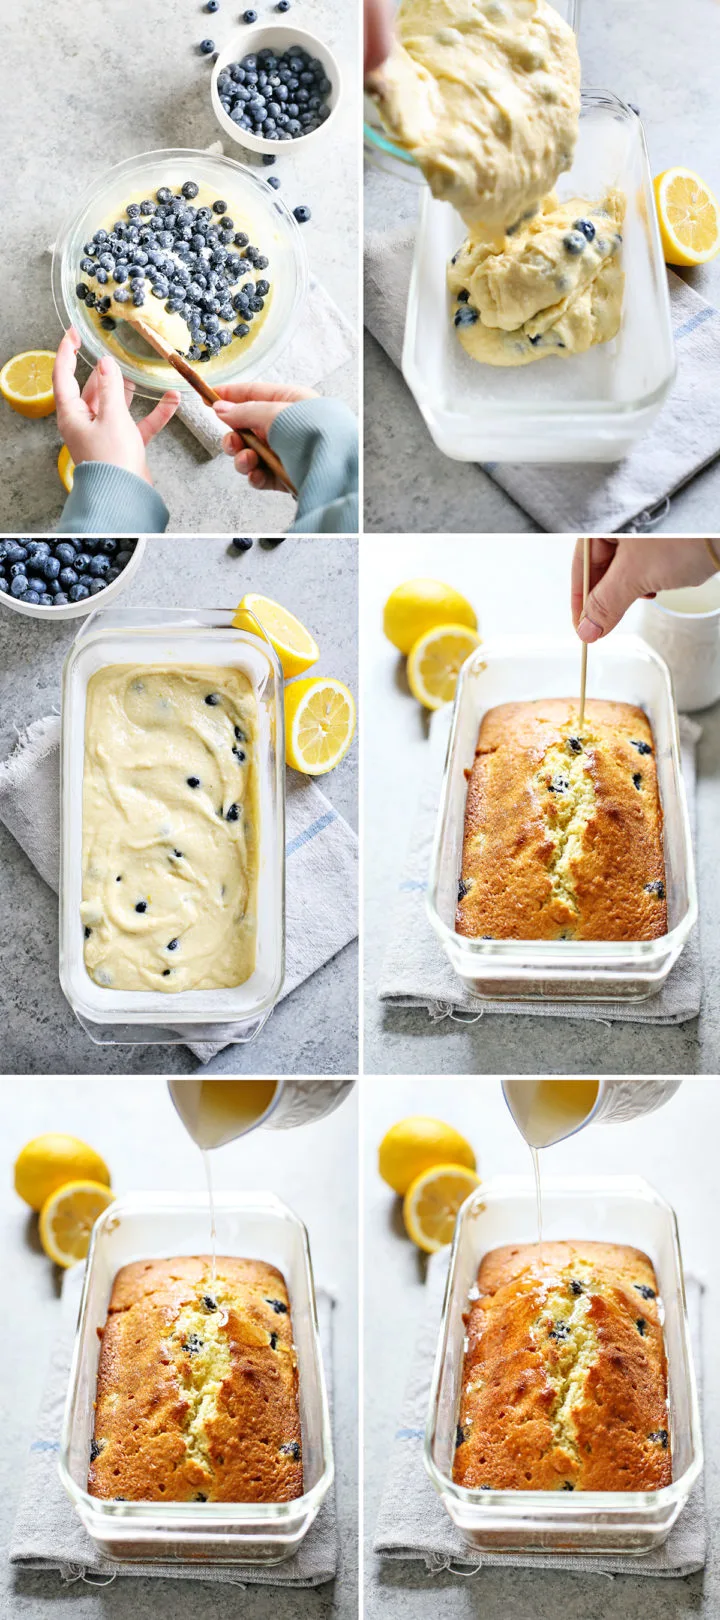 step by step photos showing how to make lemon blueberry bread